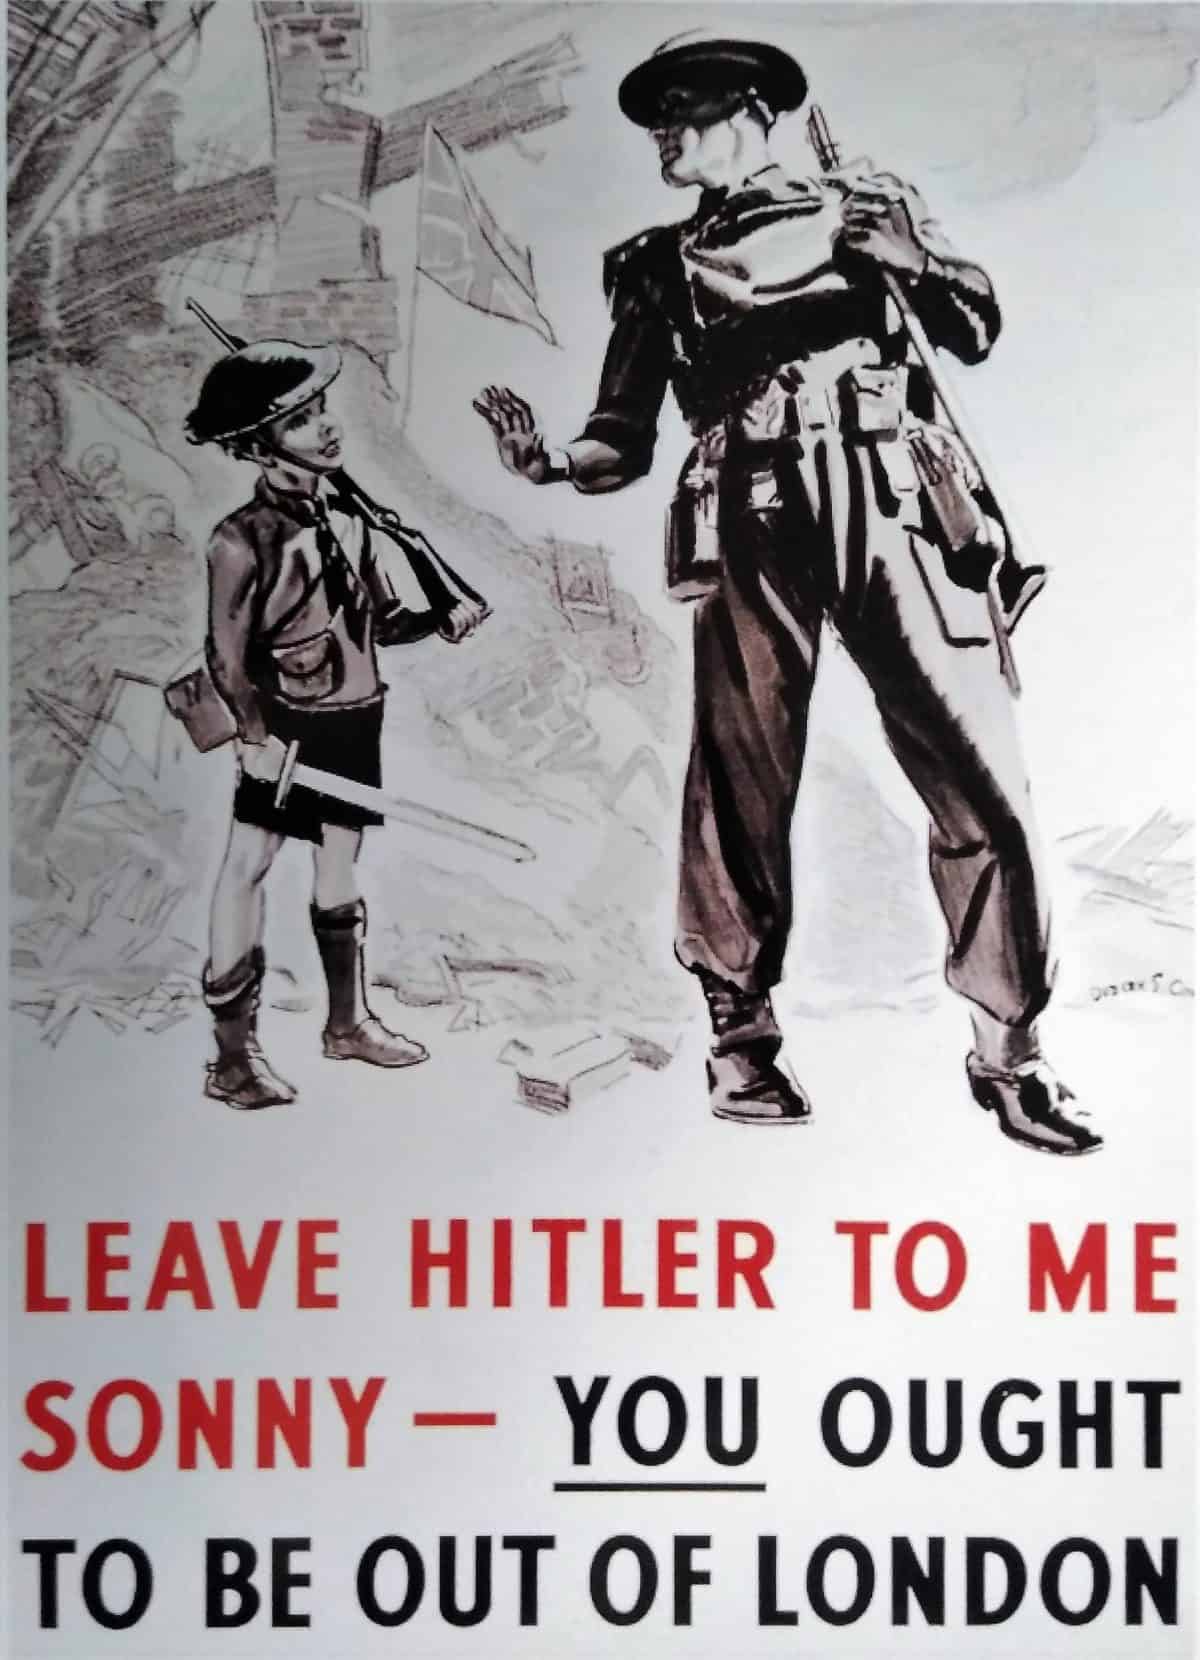 WW2 9 Evacuation poster - Leave Hitler to me sonny (cropped)